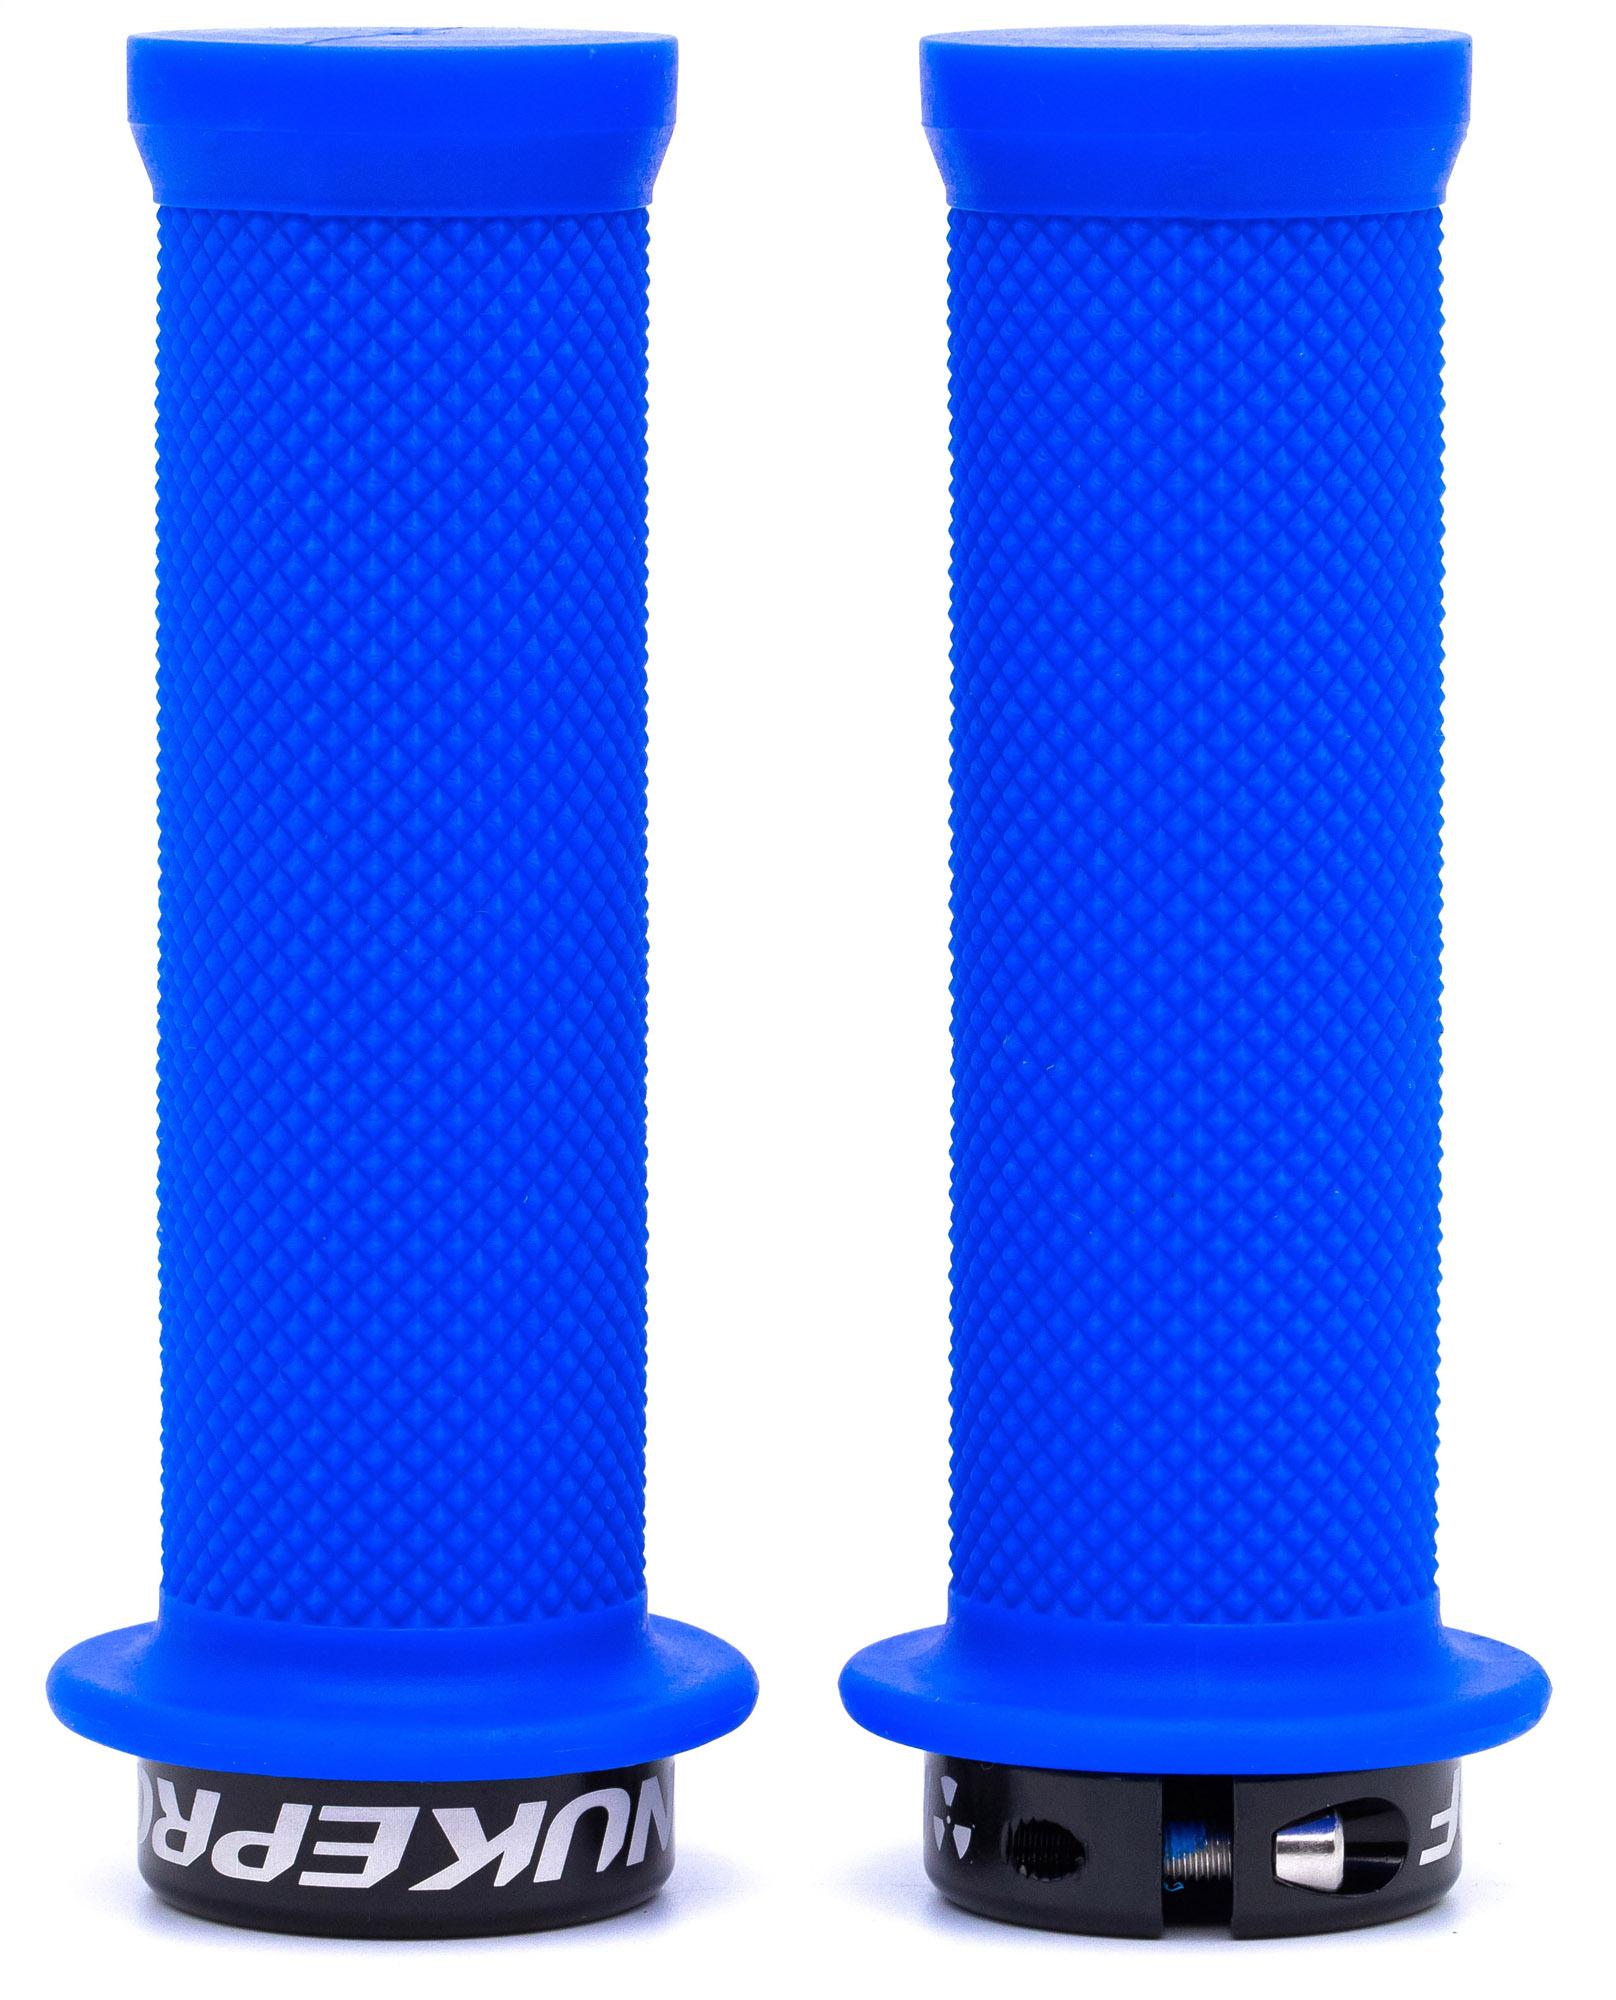 Nukeproof Urchin Youth Grips - Blue